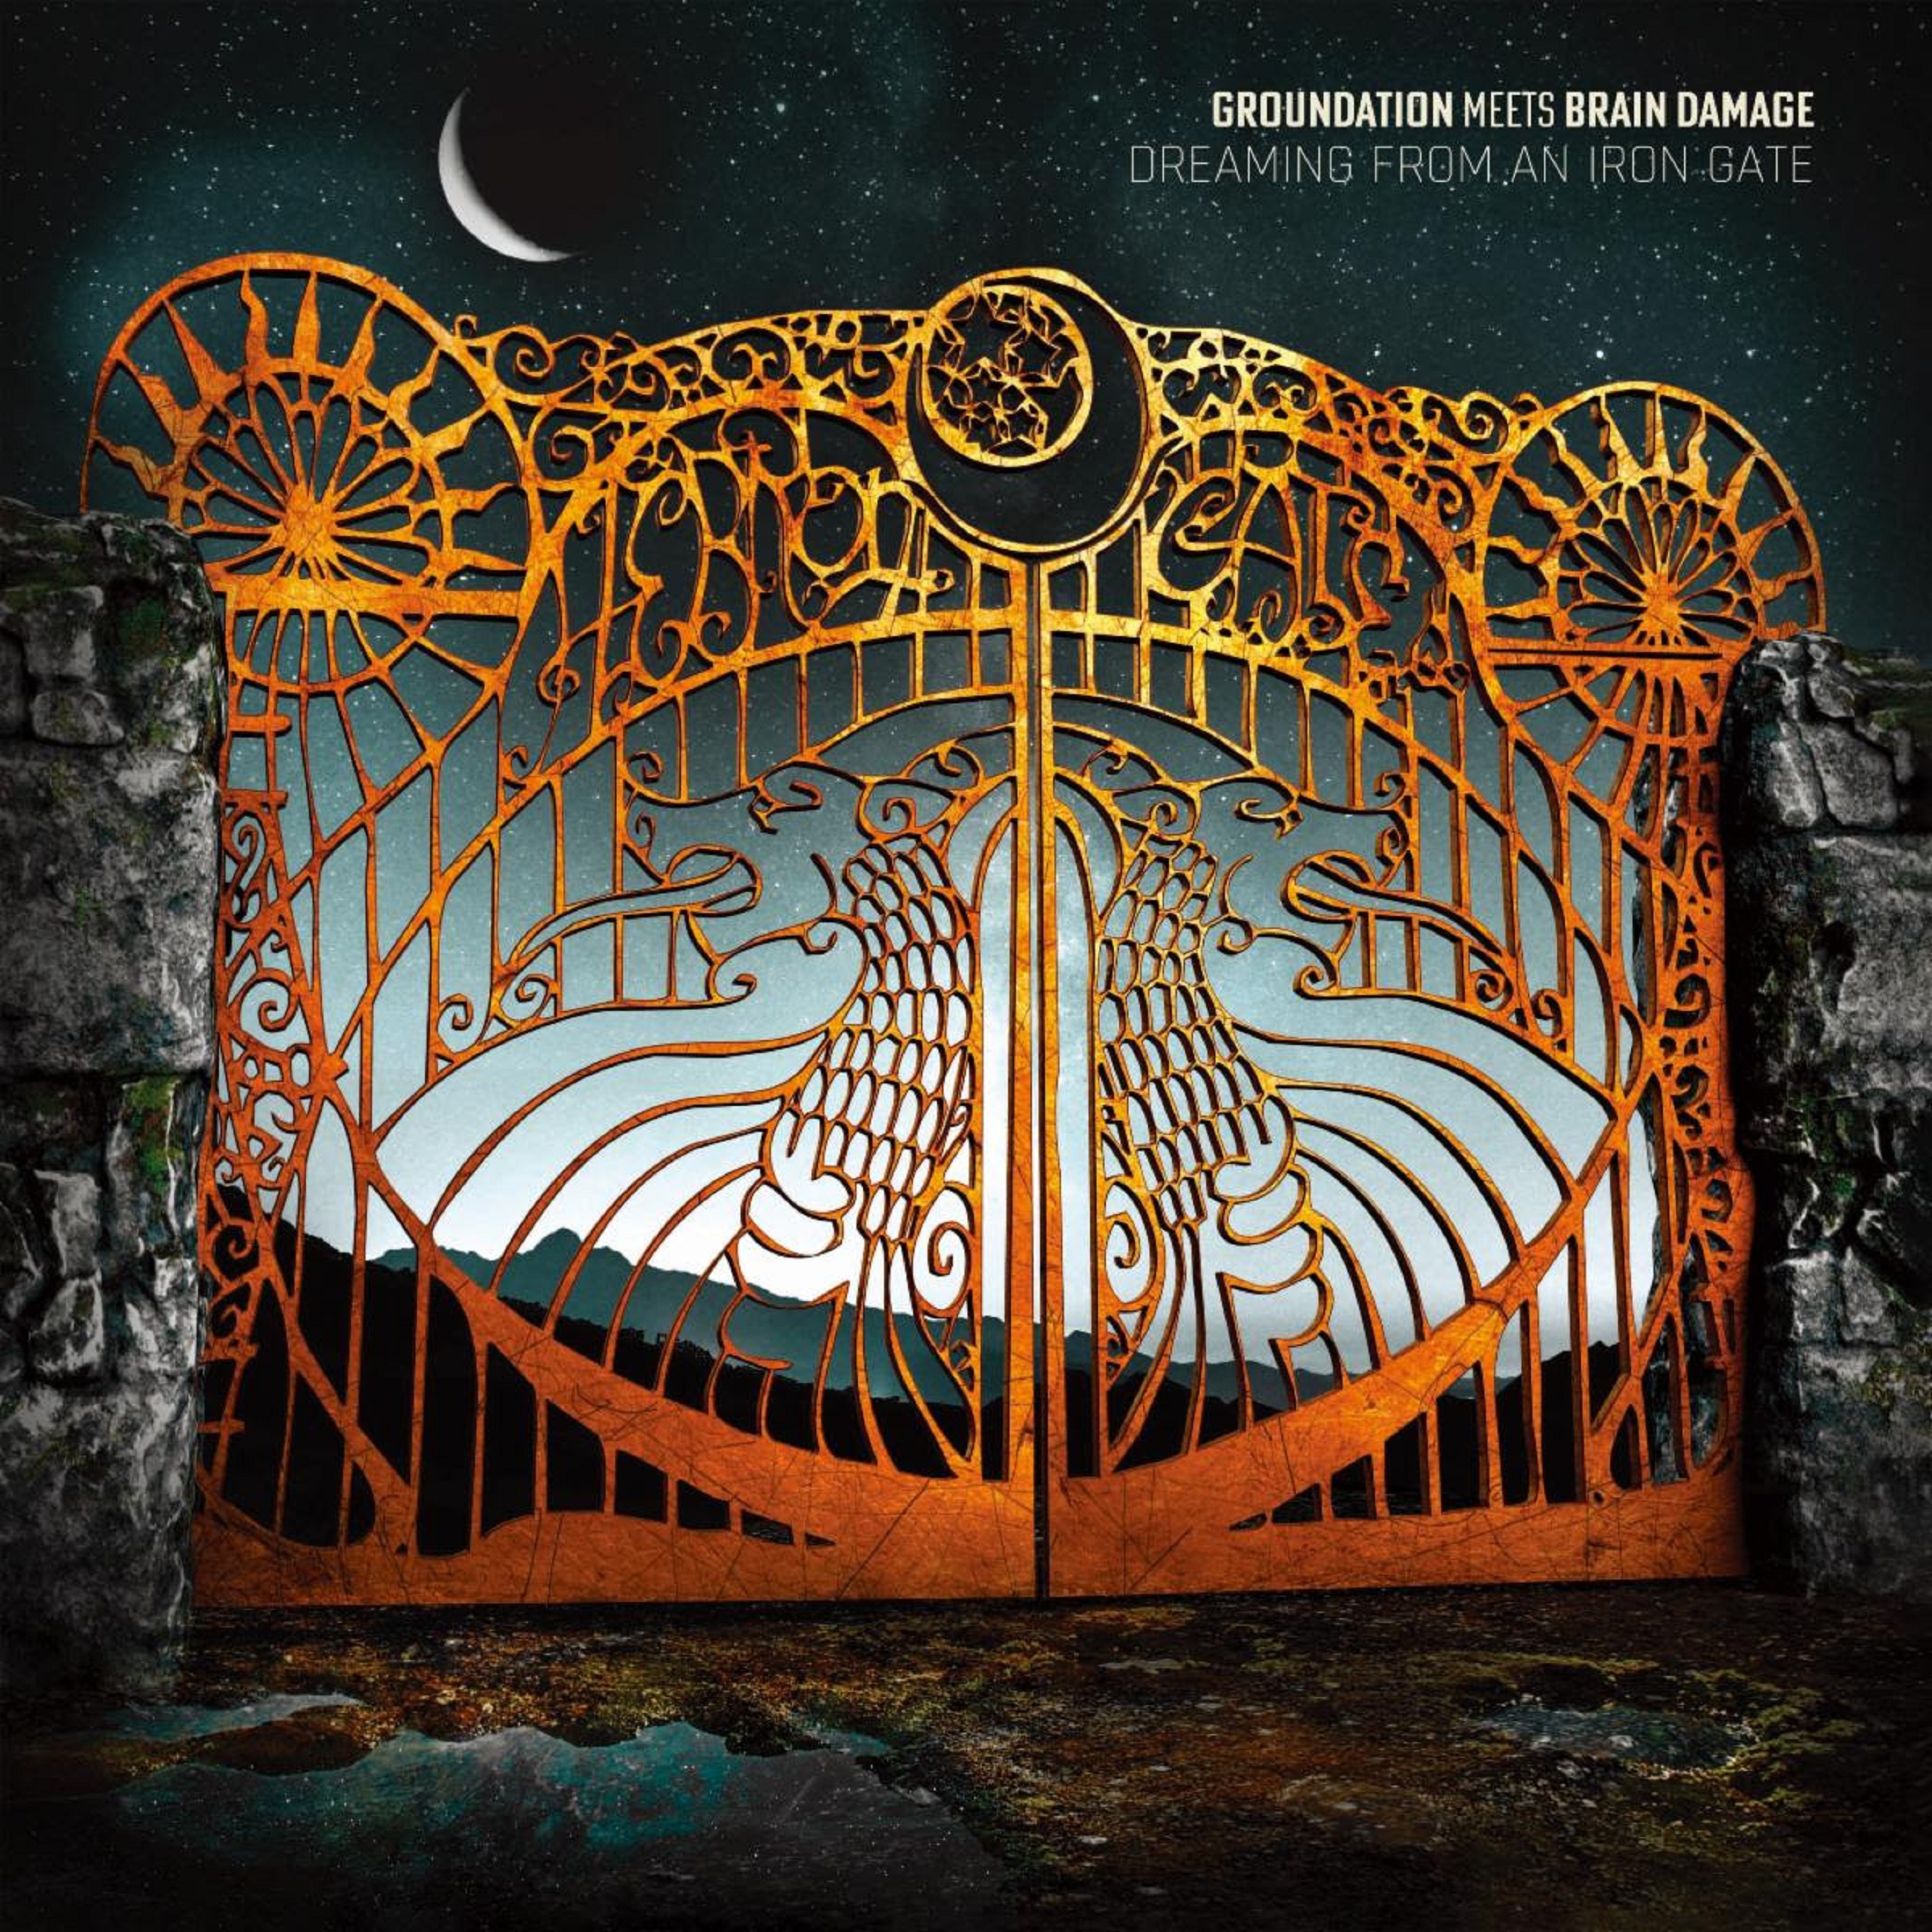 Easy Star Records Presents: Groundation Meets Brain Damage "Dreaming From An Iron Gate"